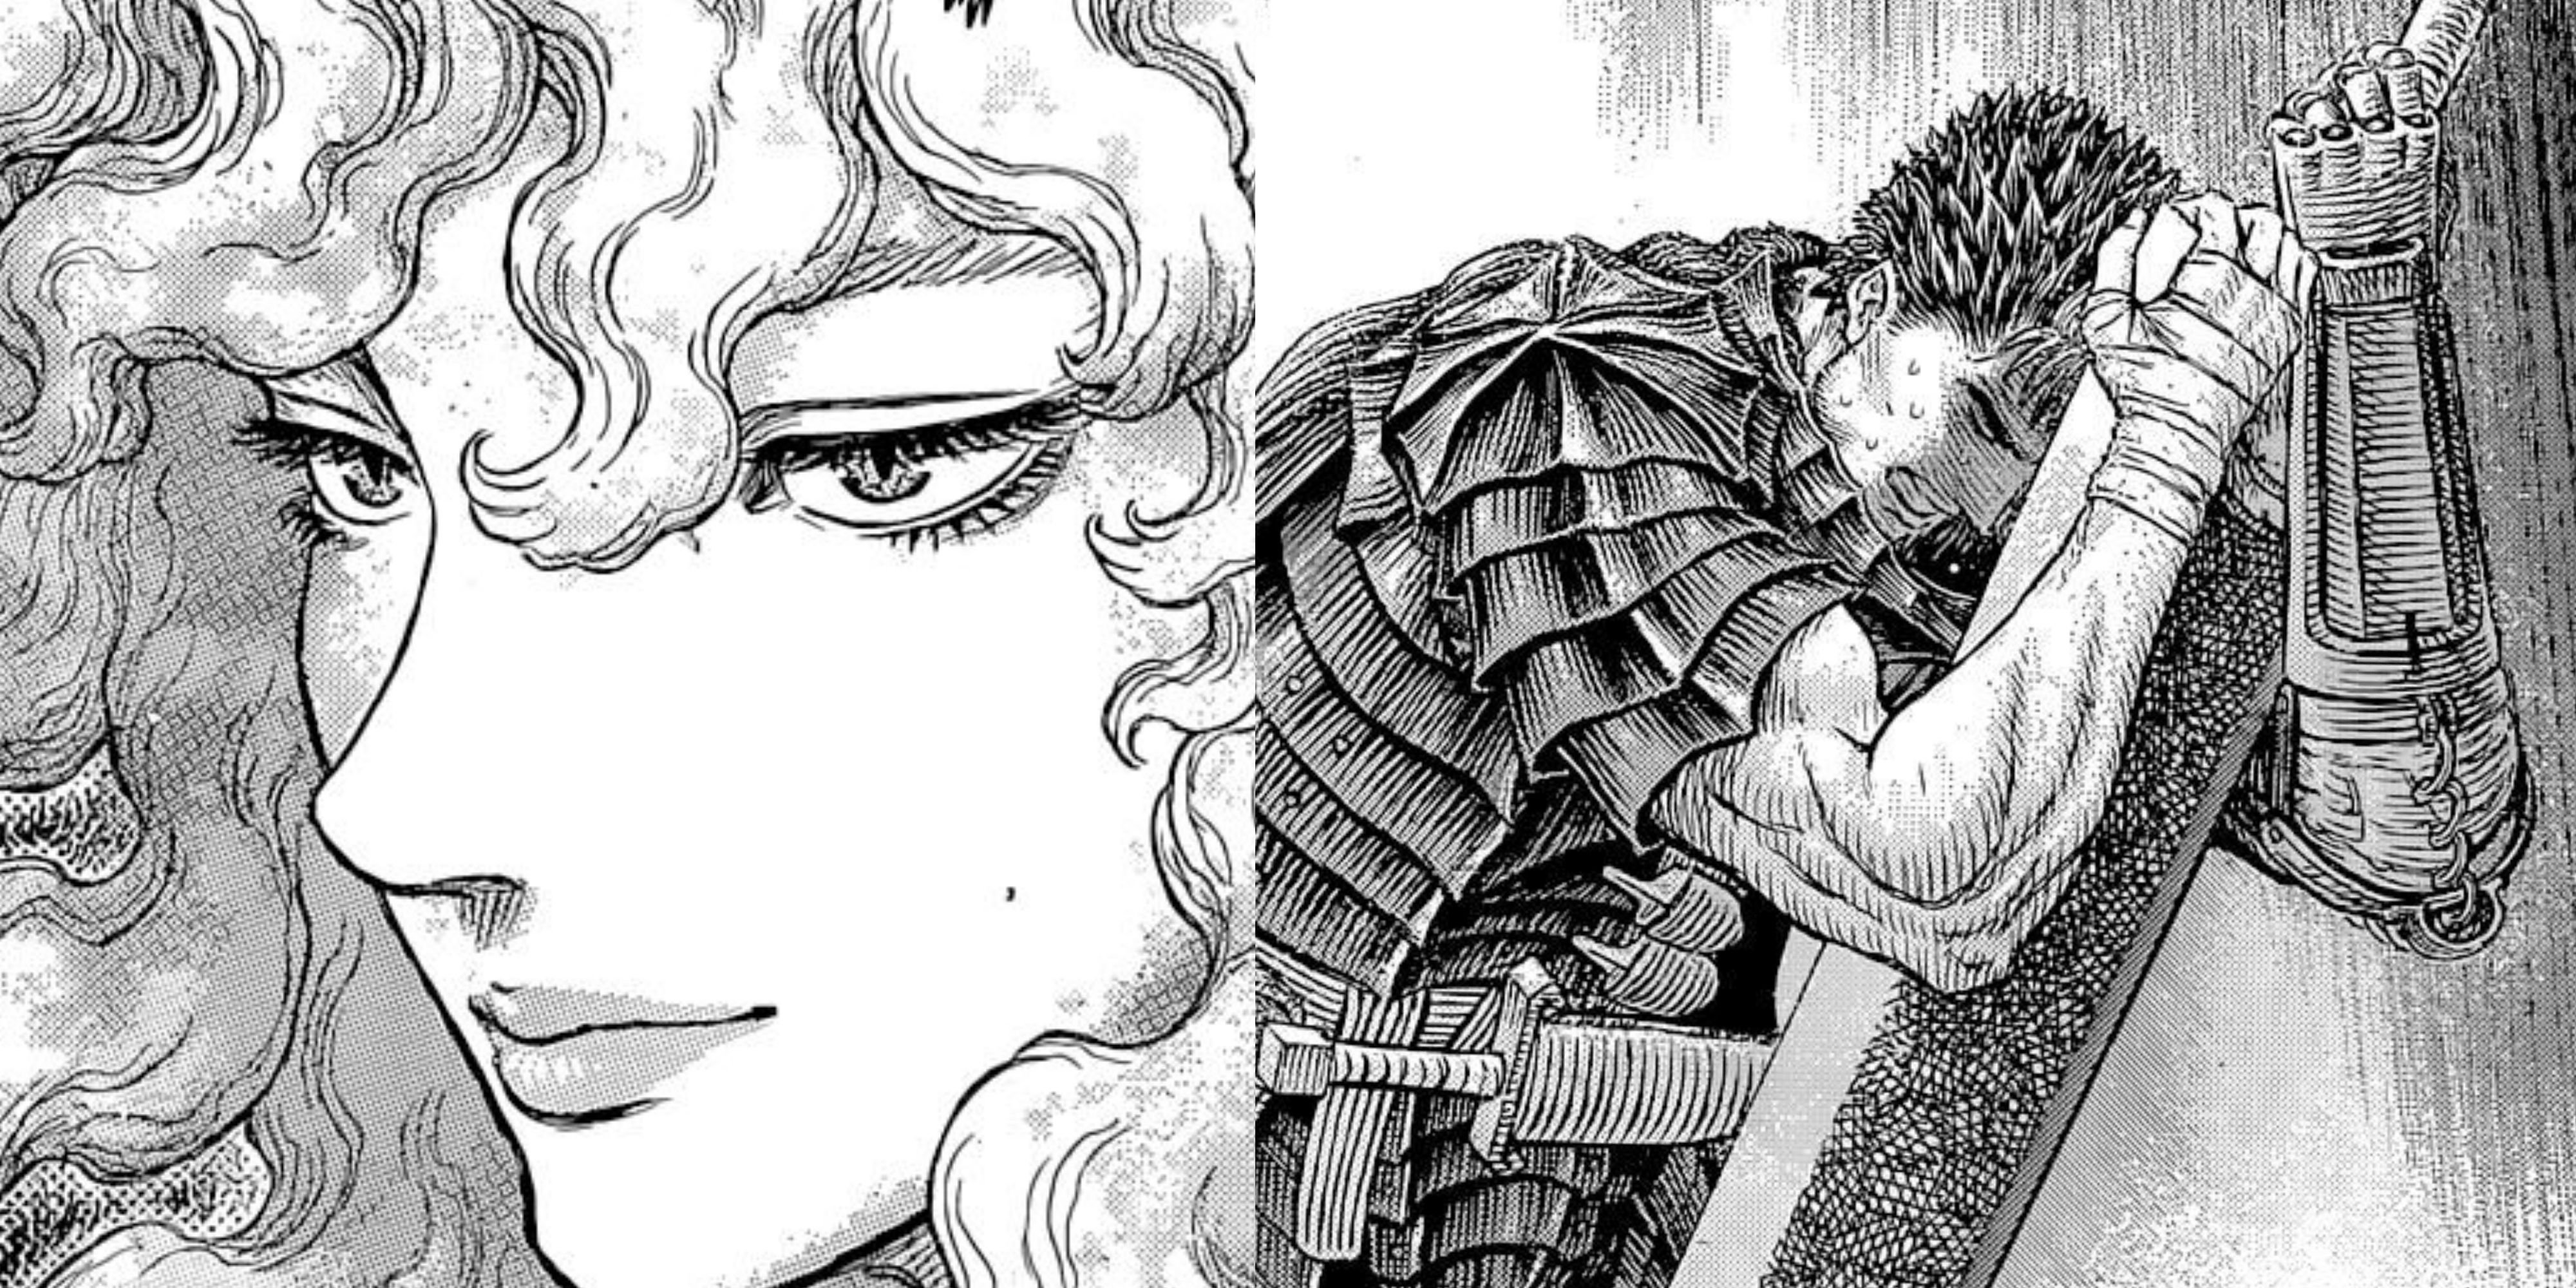 Berserk Chapter 367 Release Date When Will The Next Part be Published   GameRevolution